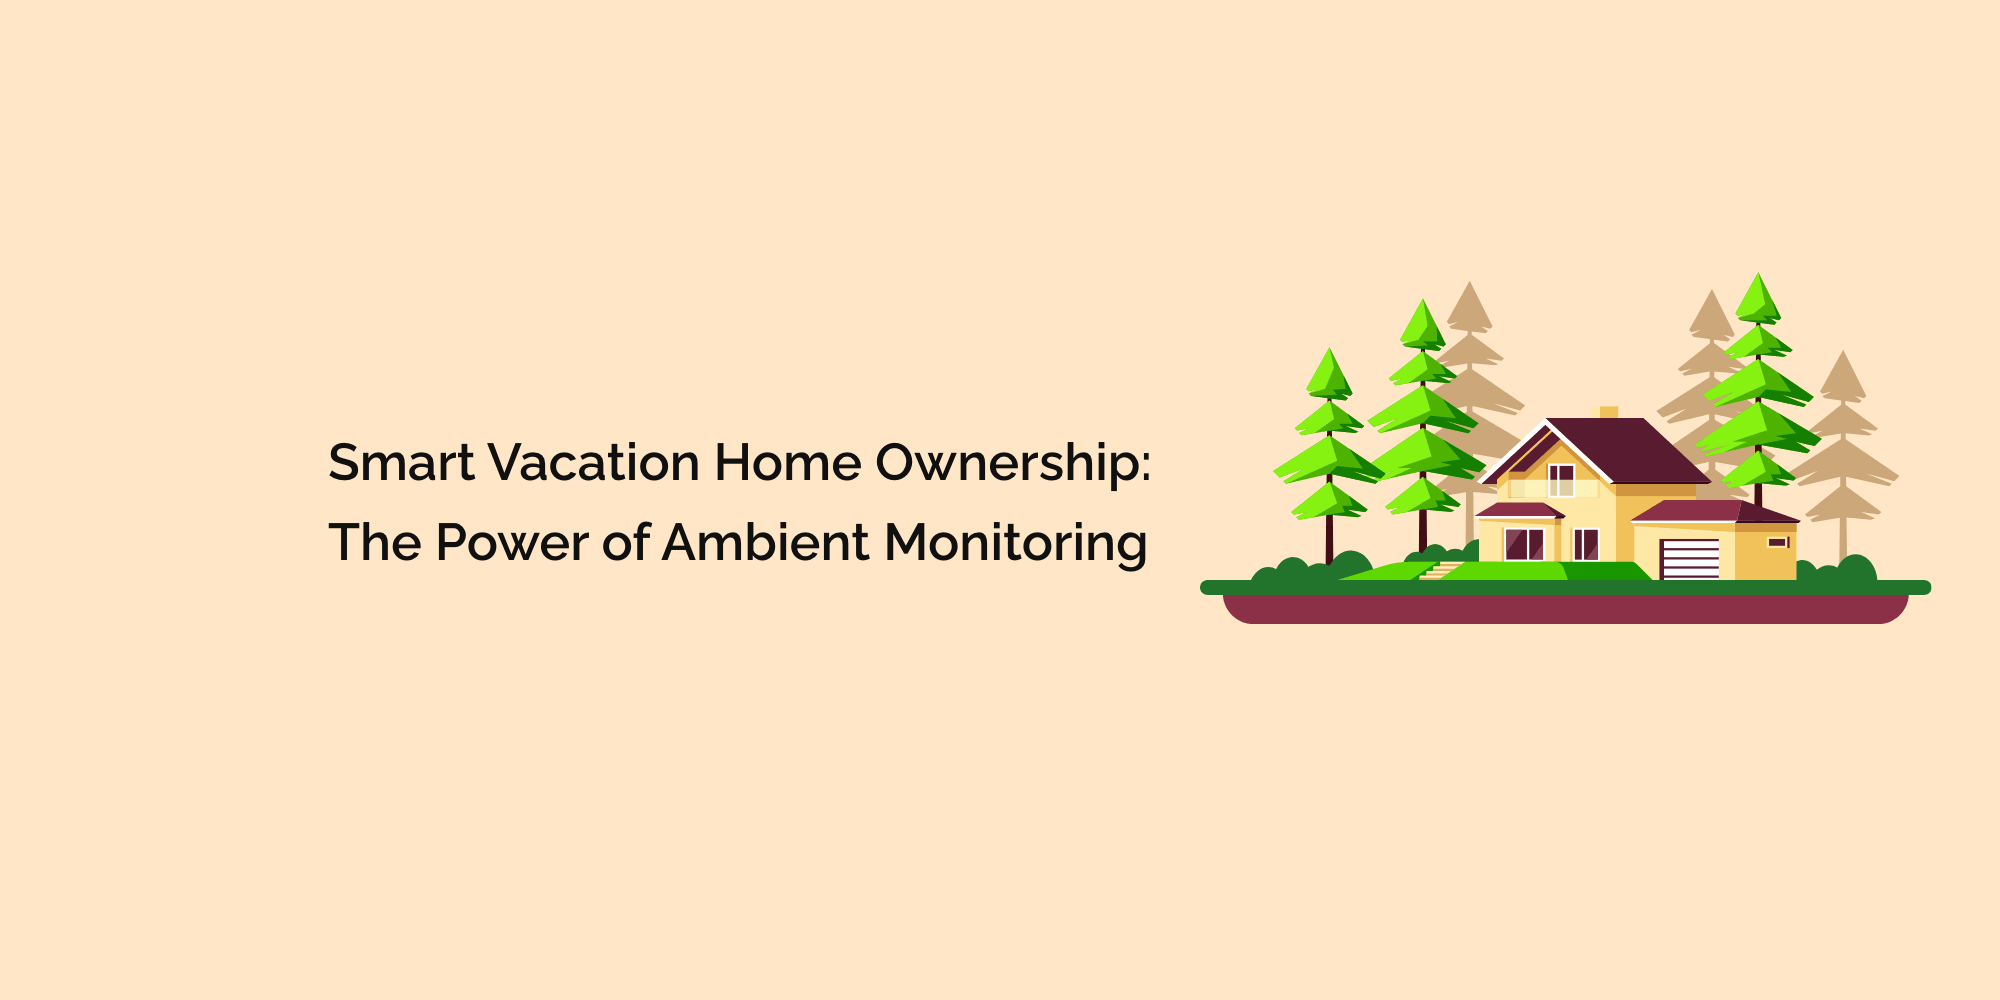 Smart Vacation Home Ownership: The Power of Ambient Monitoring